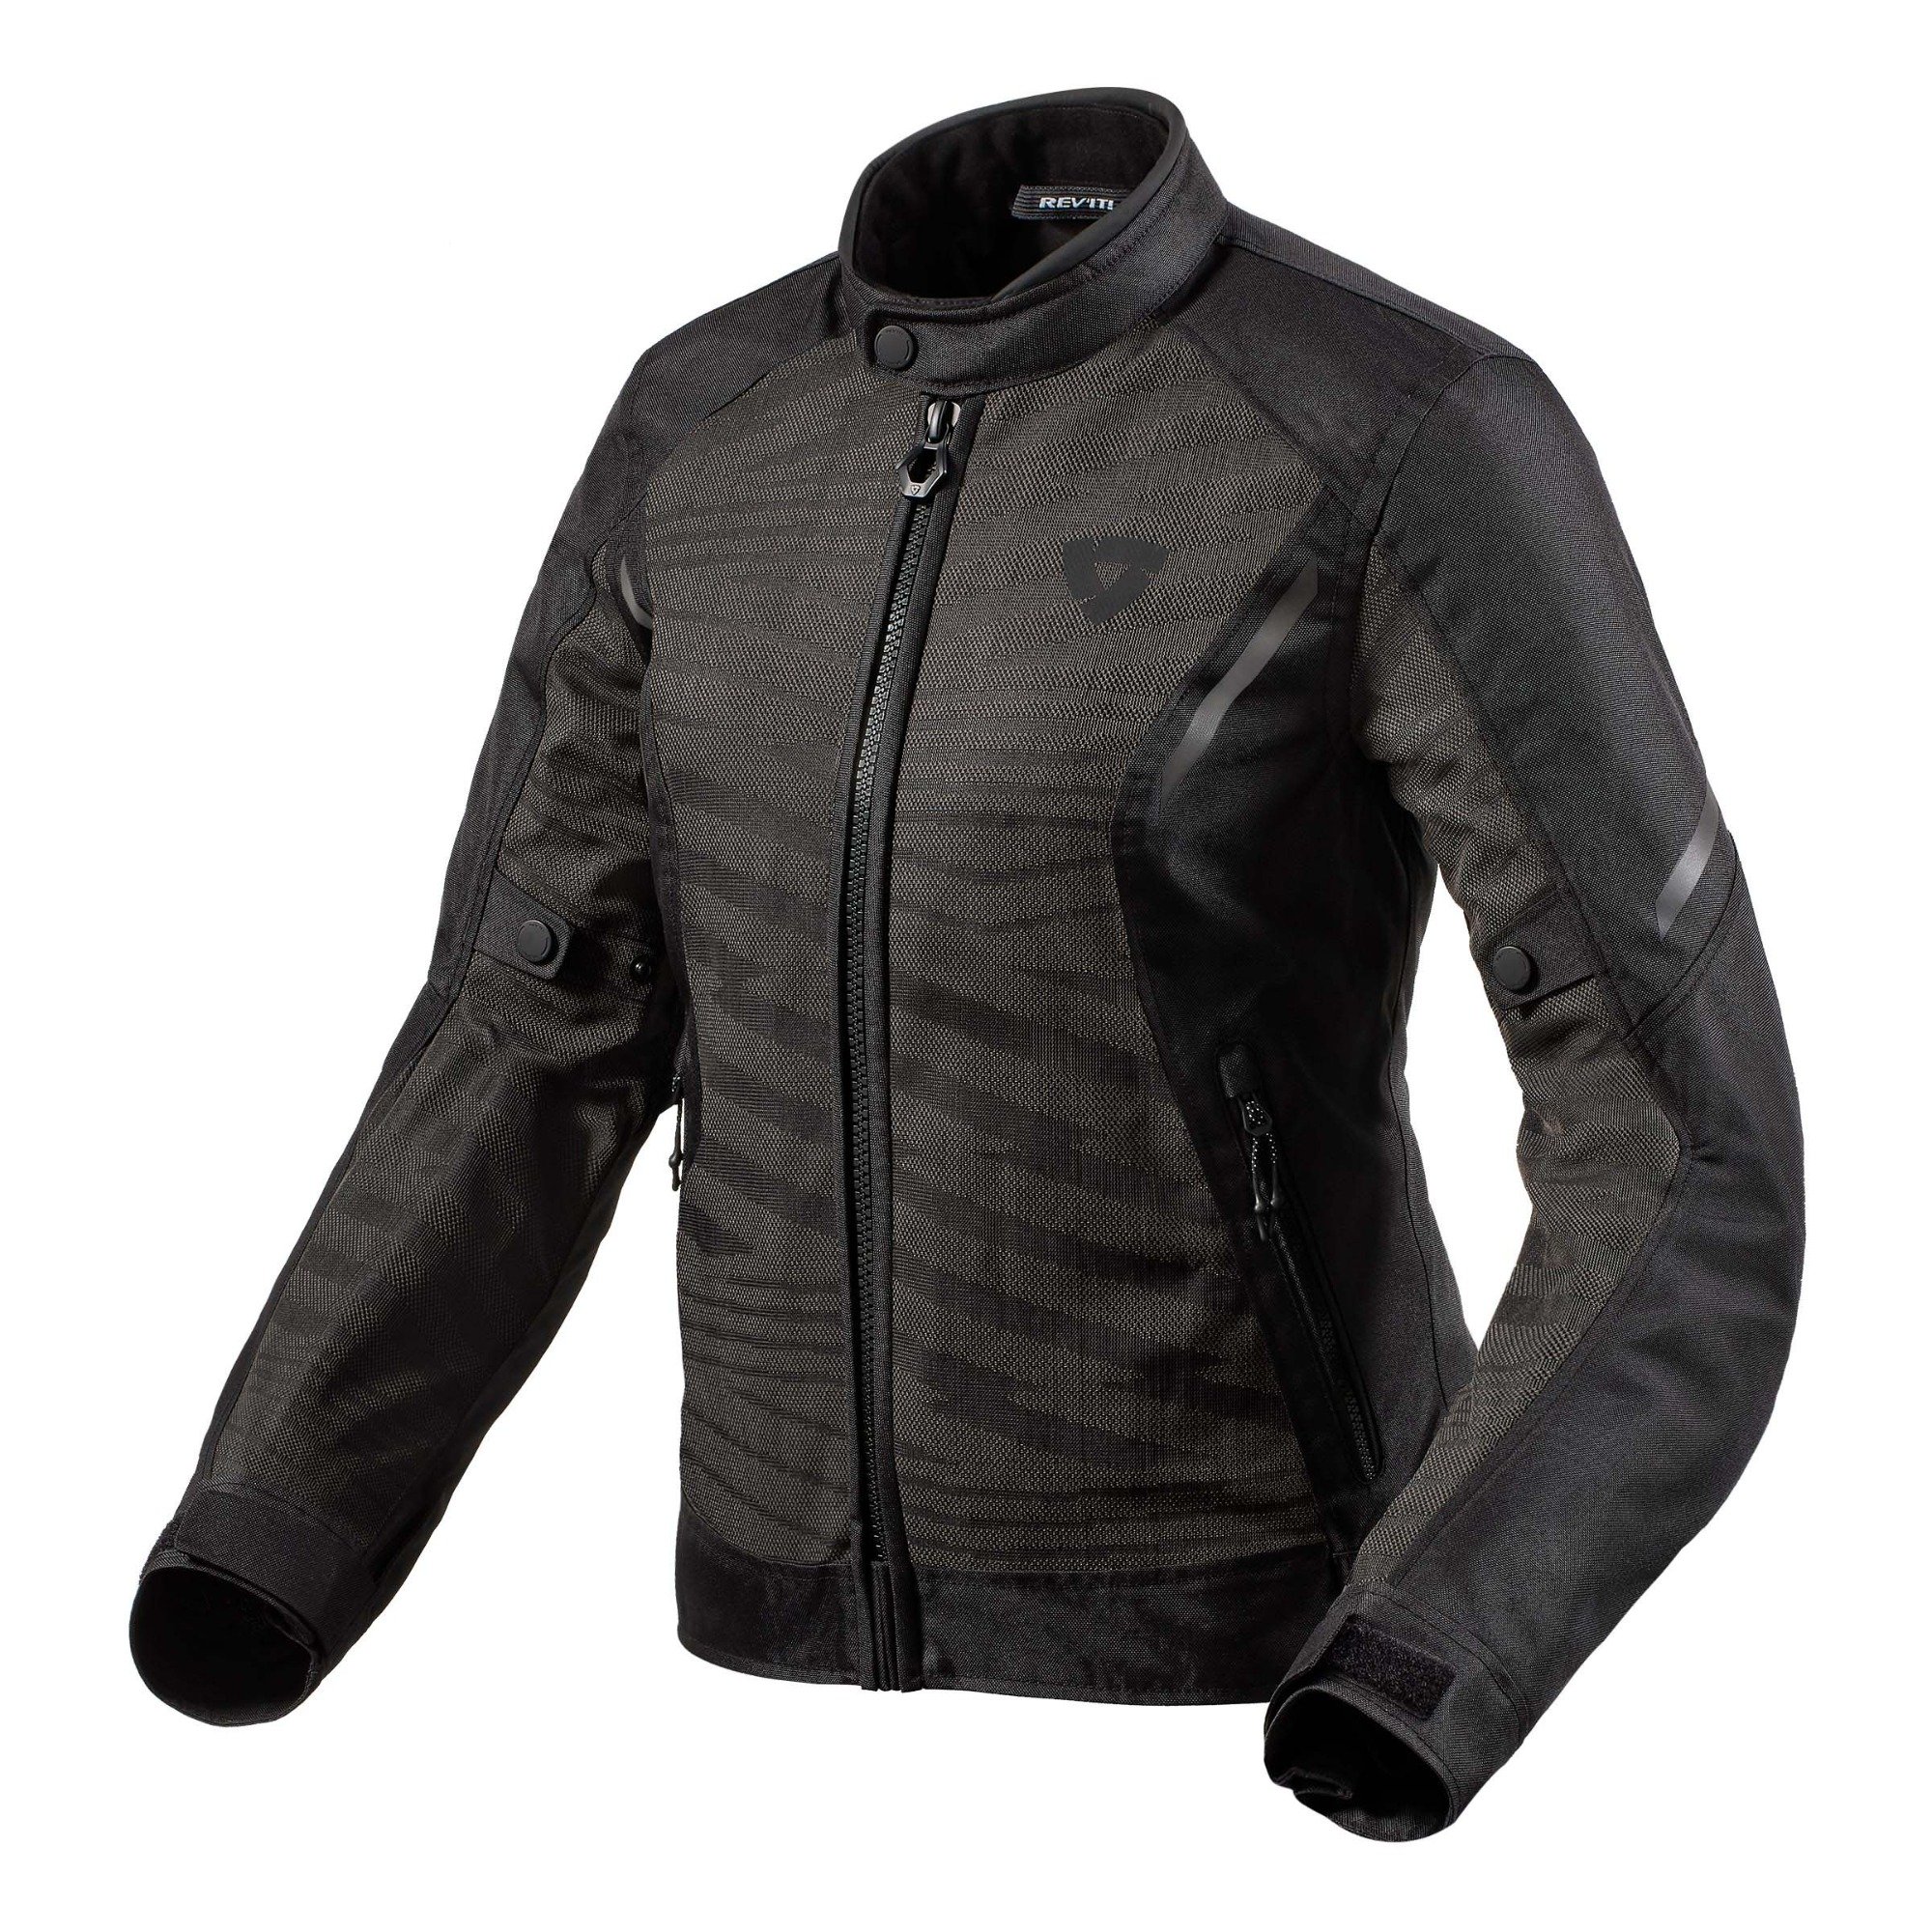 Image of REV'IT! Torque 2 H2O Jacket Lady Black Anthracite Size 34 ID 8700001345491